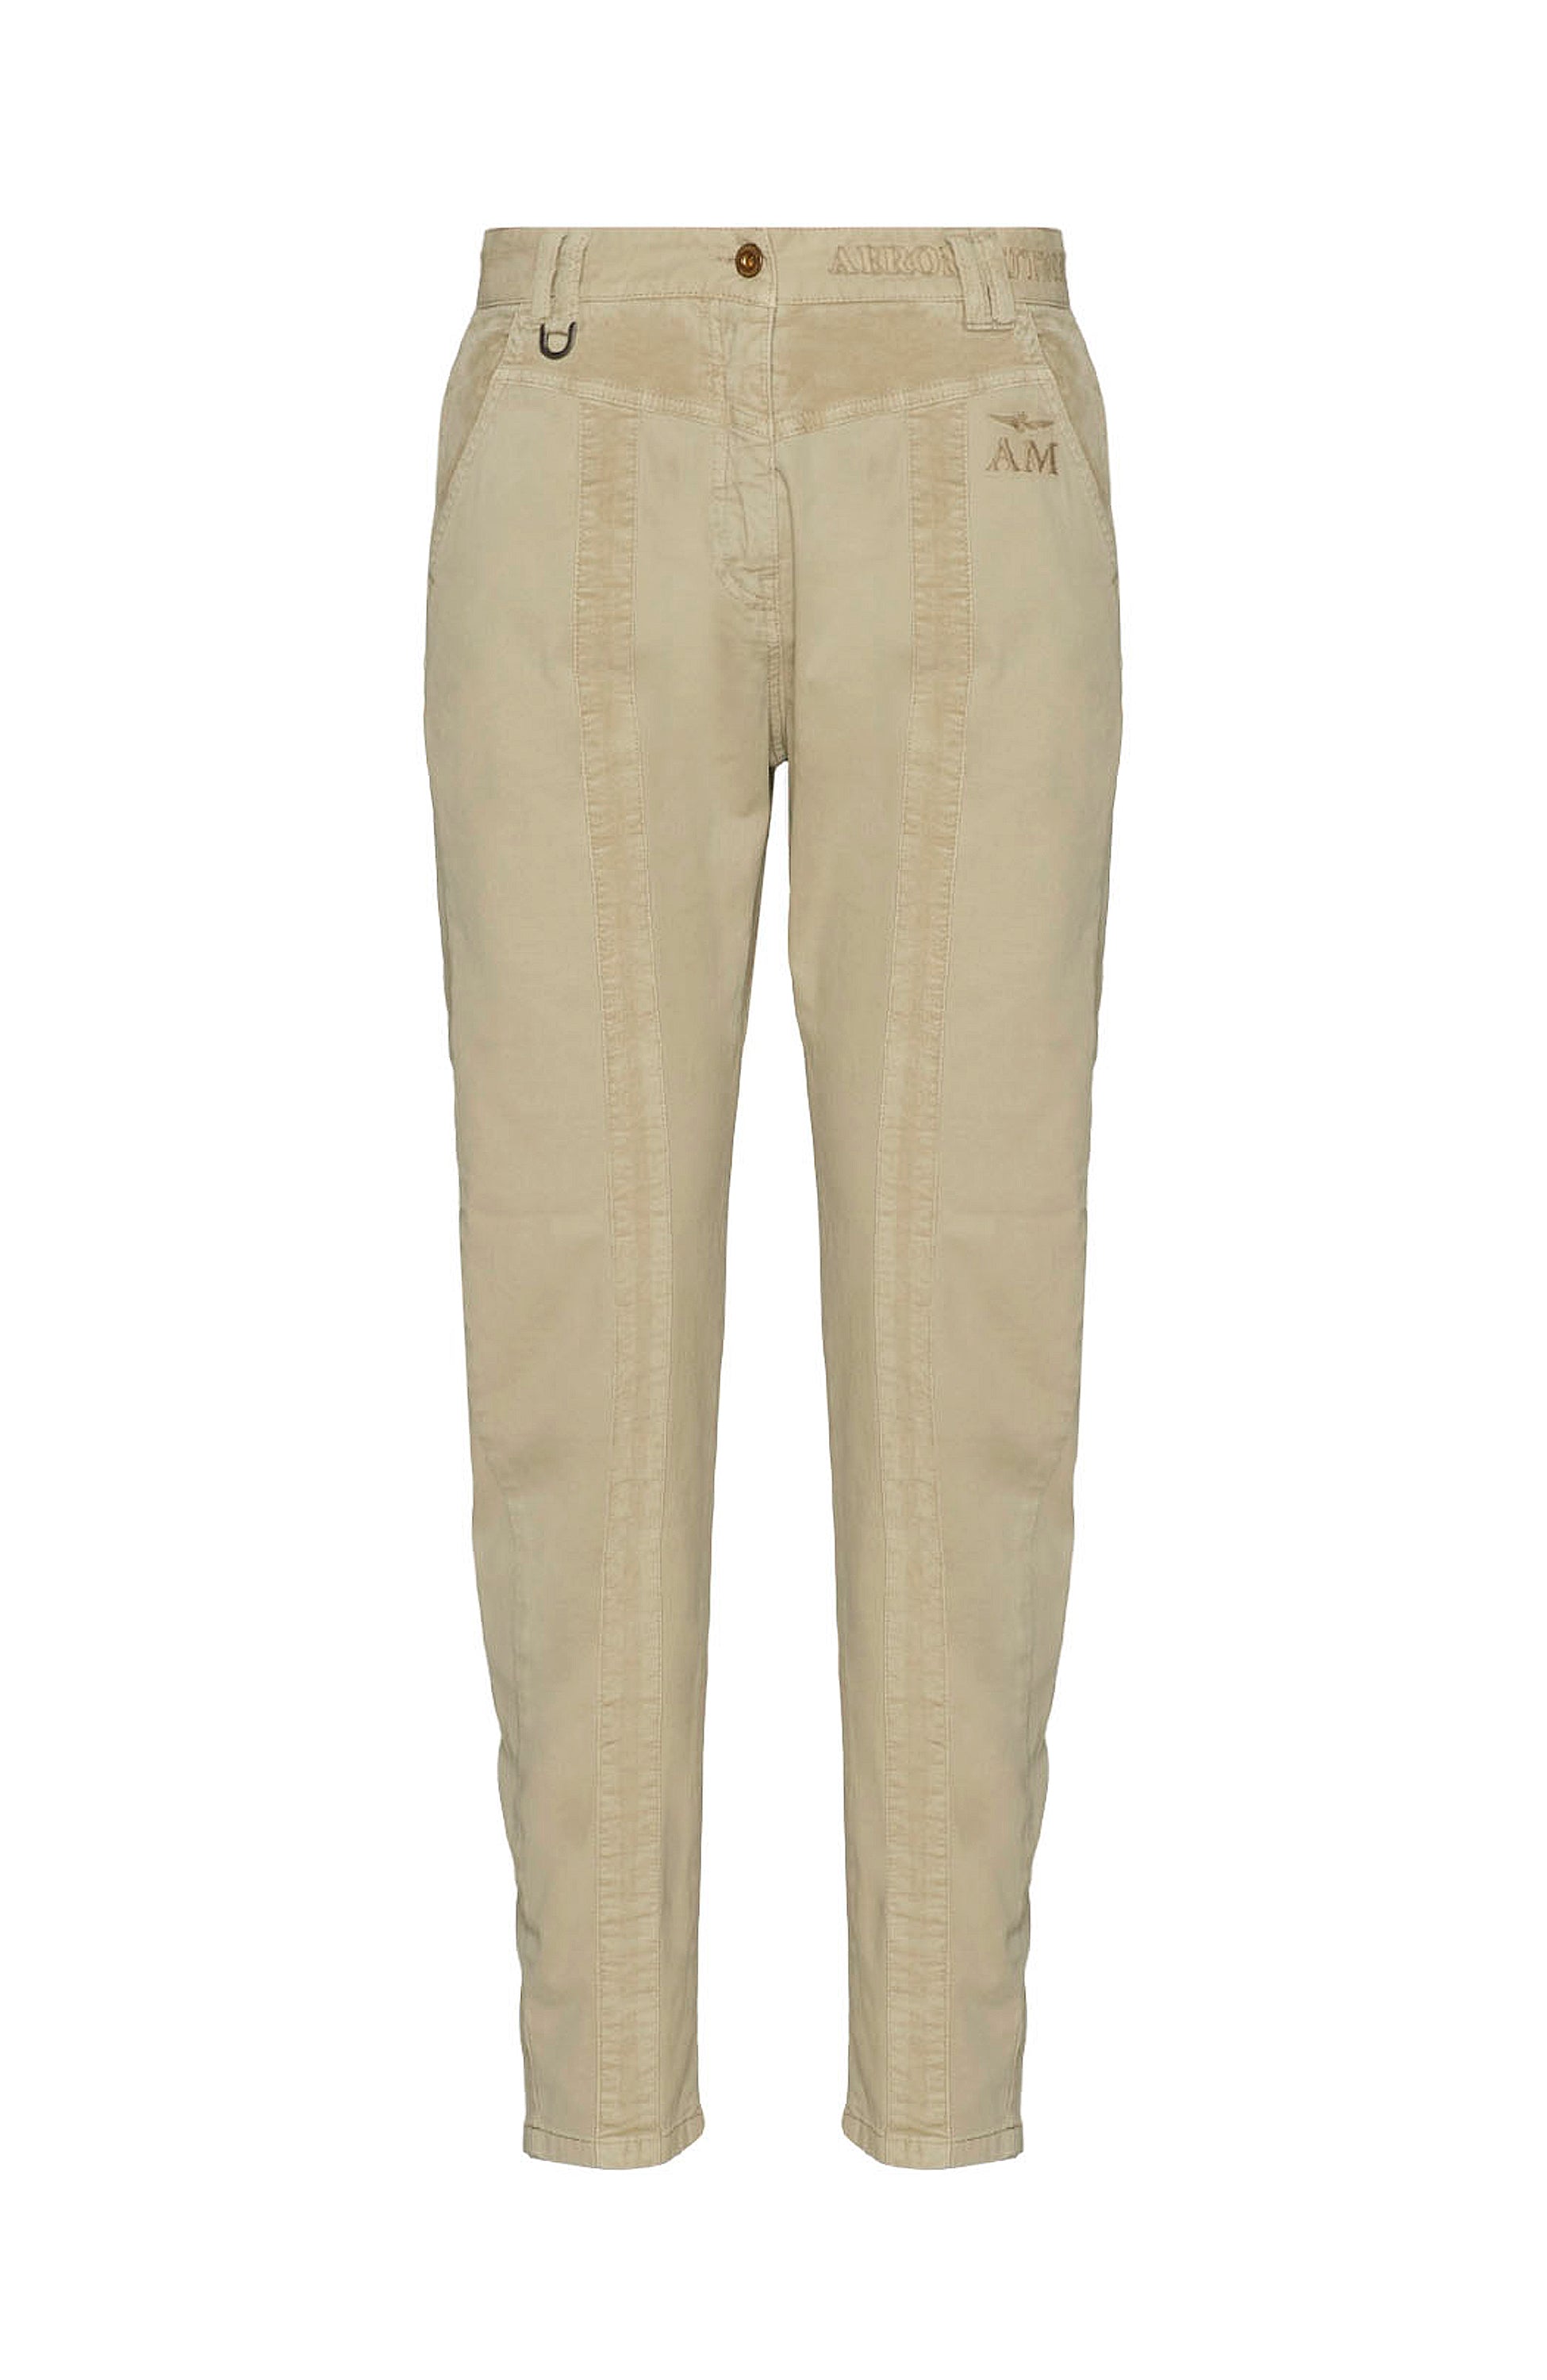 Slouchy cotton trousers